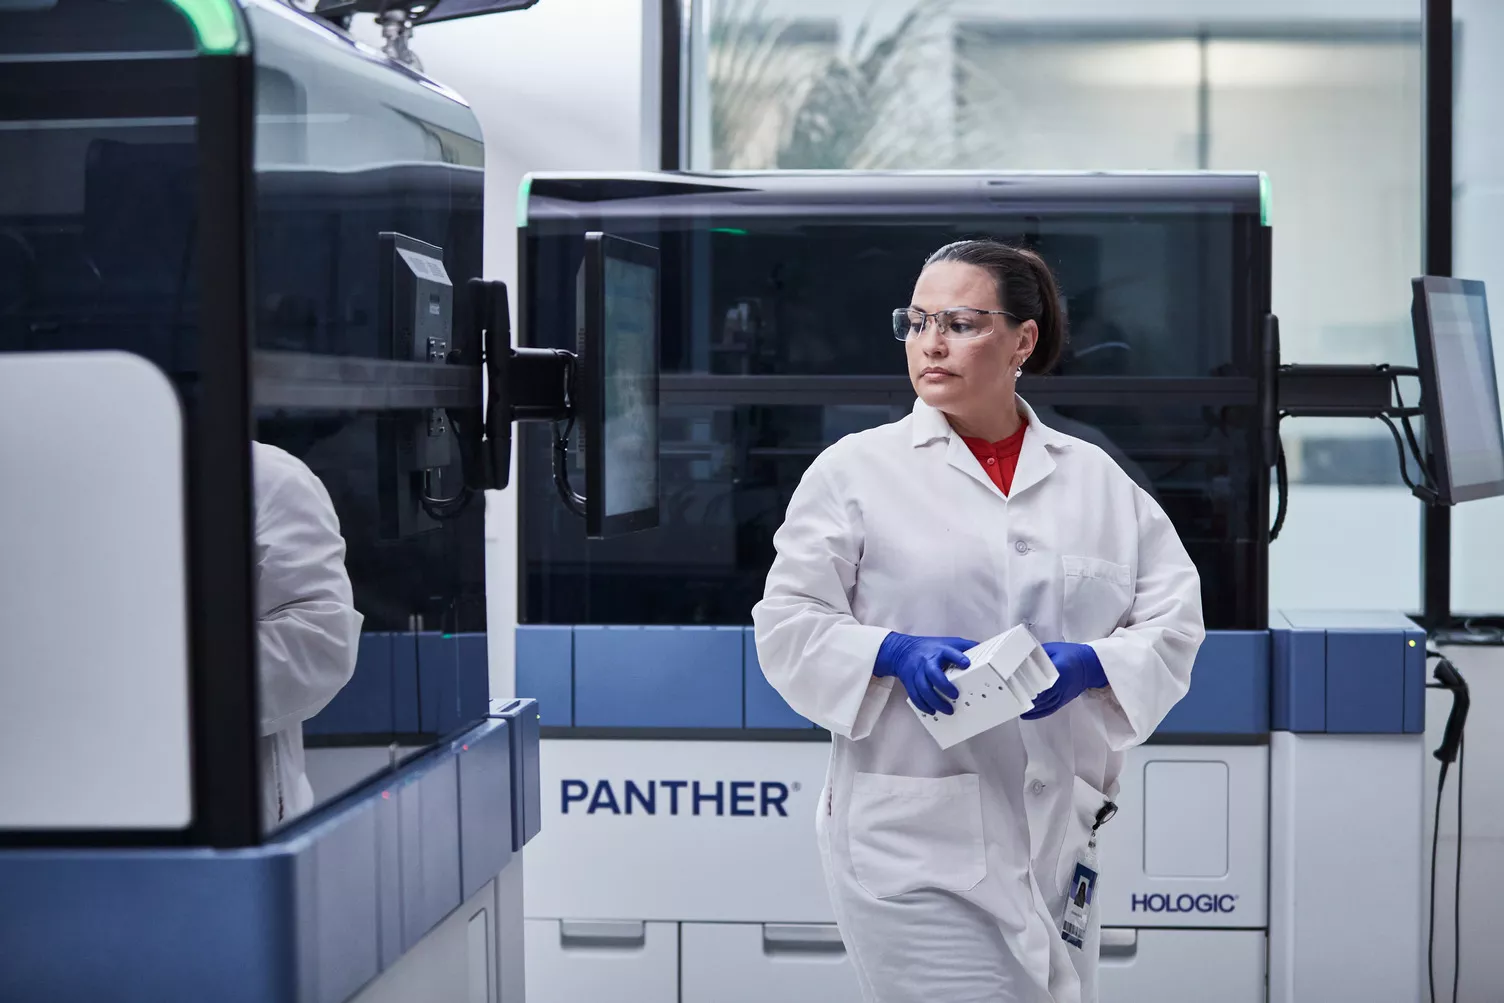 Technician walking by Panther Systems in a lab setting.